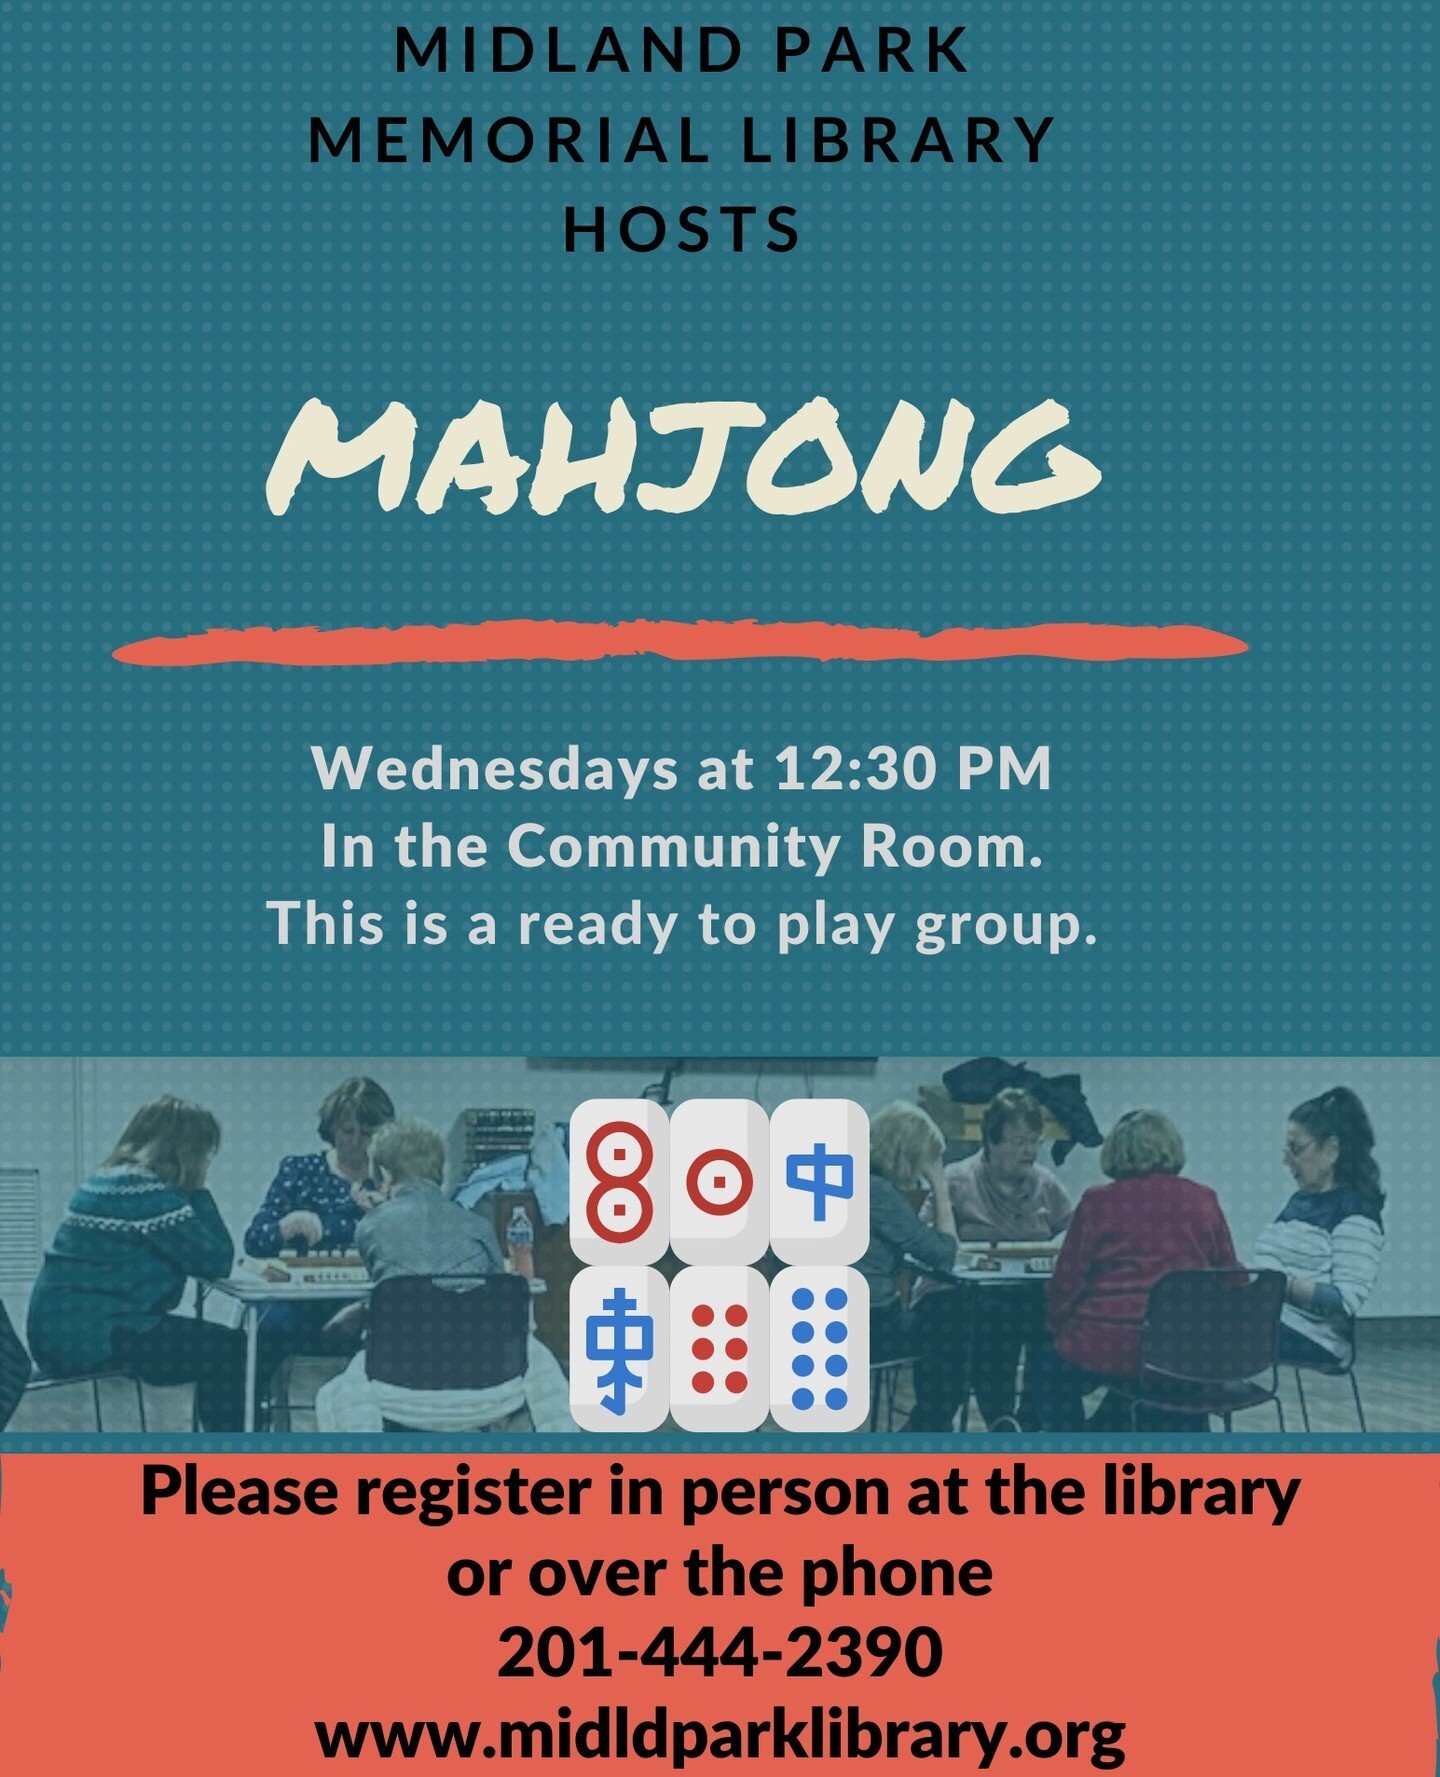 Join us on Wednesdays at 12:30 PM for Mahjong in the Community Room.⁠
Stop by the Circulation desk or call 201-444-2390 to register.